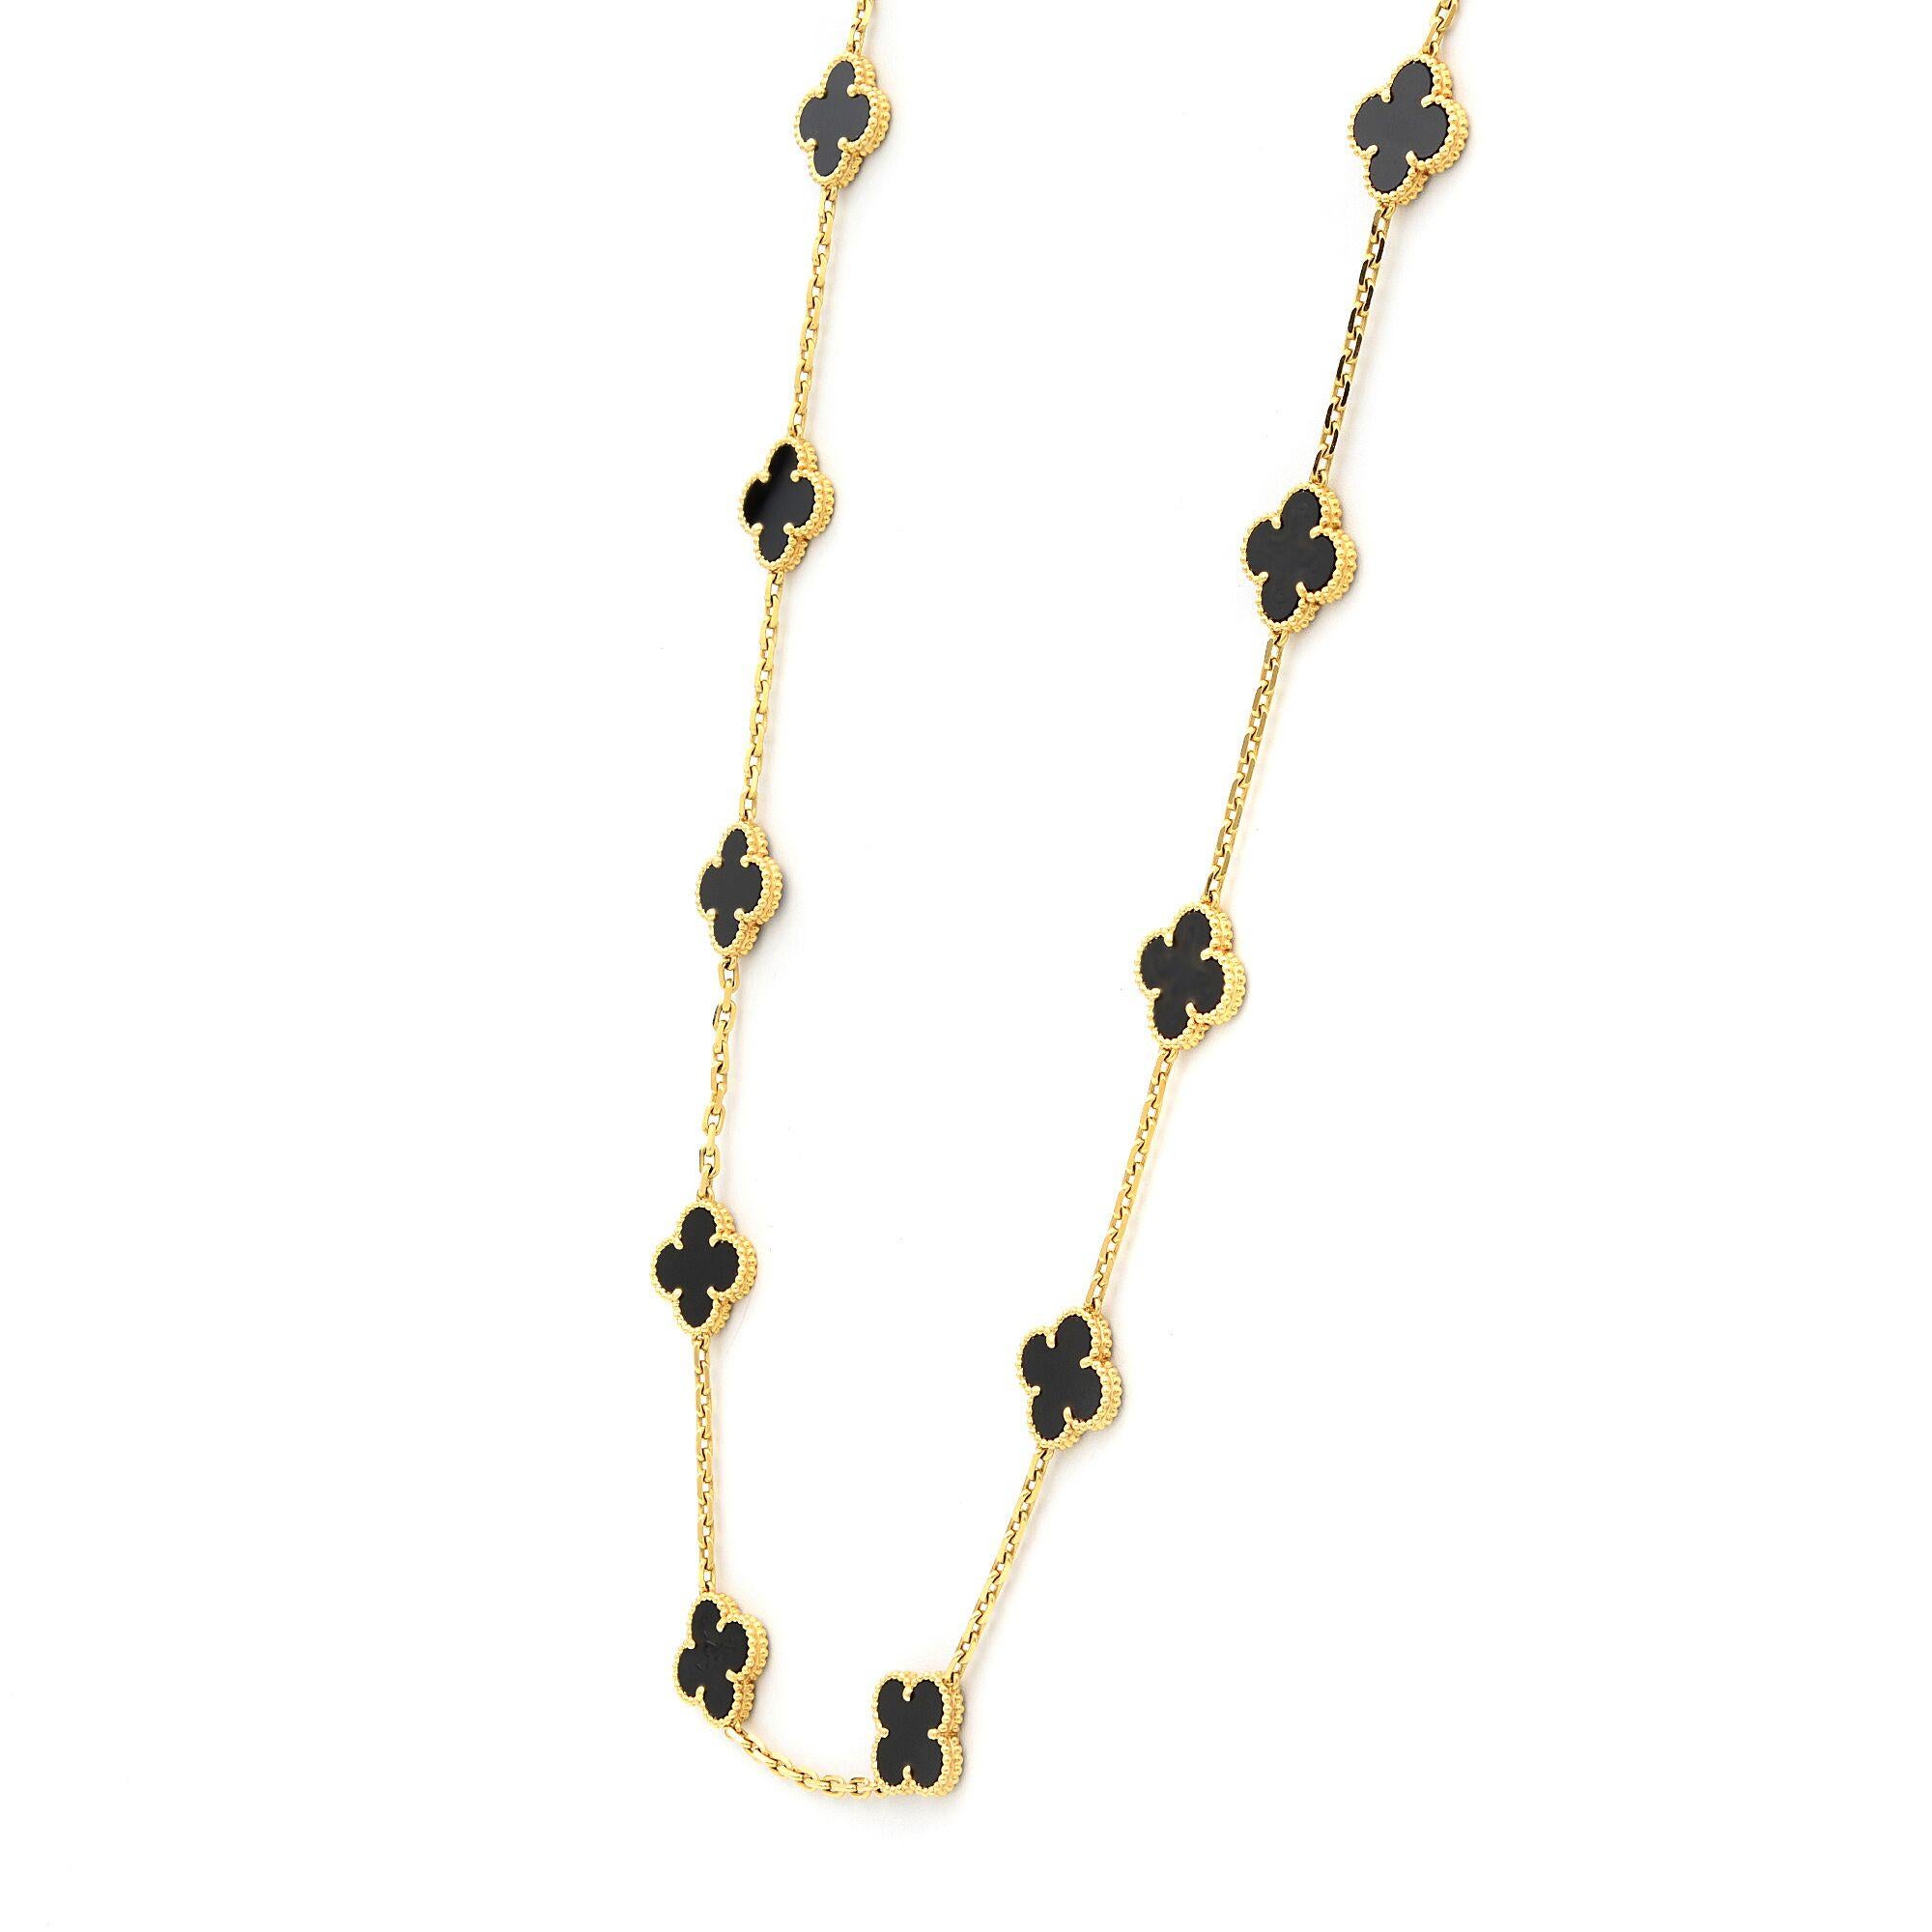 Van Cleef & Arples Vintage Alhambra long necklace, 20 onyx motifs, 18K yellow gold. Necklace Length: 33.6 inches. Each motif is 15mm. Hallmarked clasp yellow gold. This piece is very classic and luxurious, it was inspired by the clover leaf, these